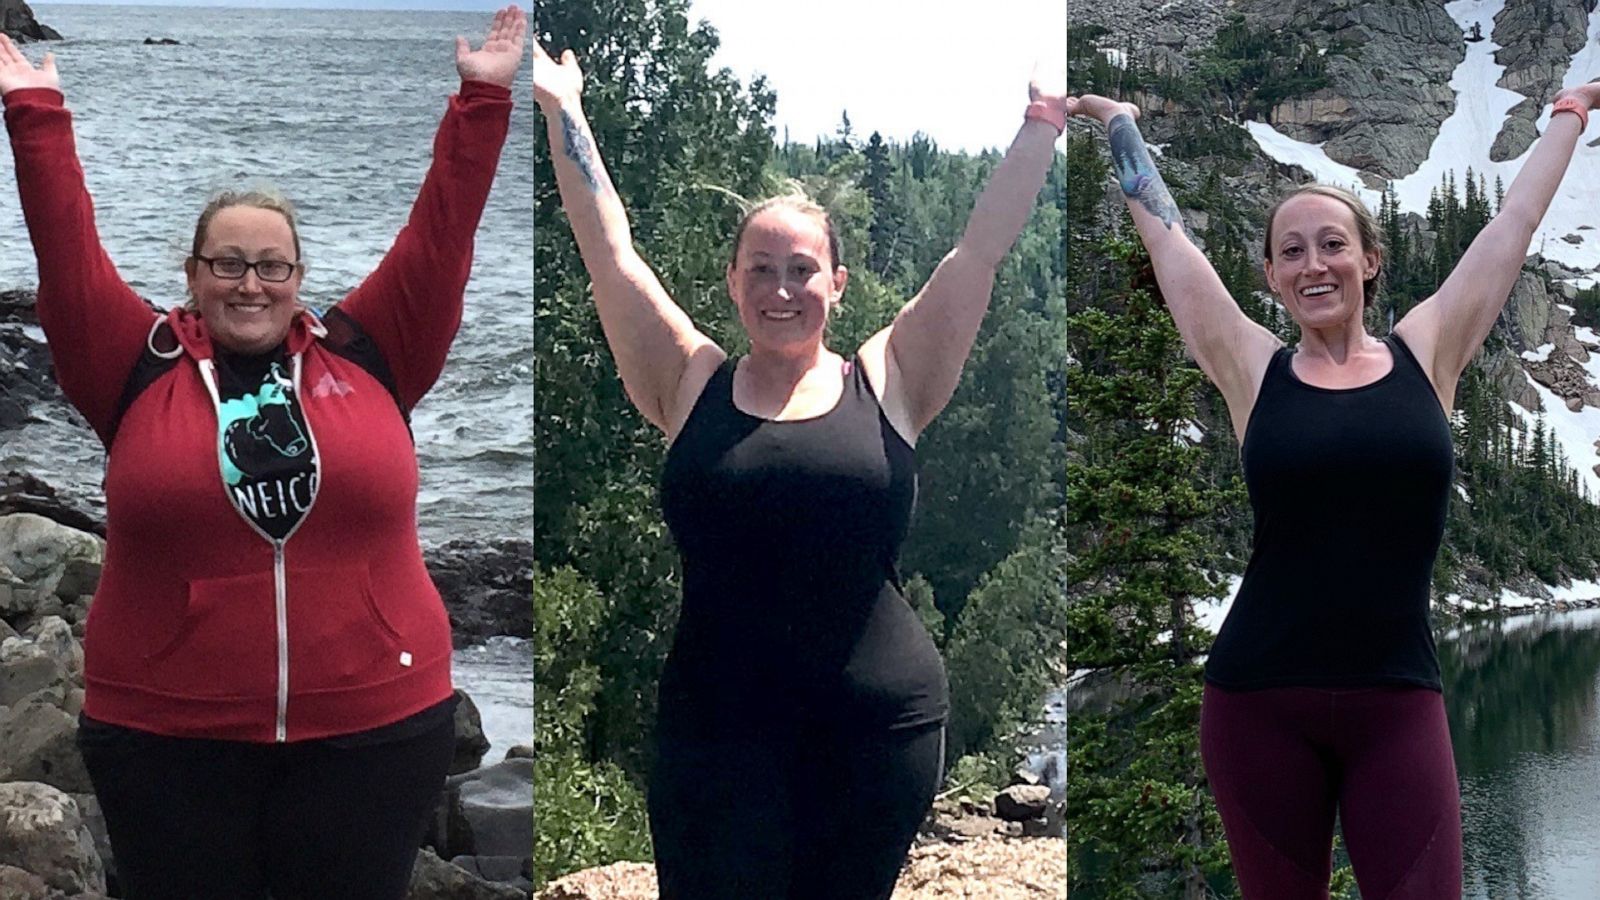 5 tips from a woman who lost more than 200 pounds - Good Morning